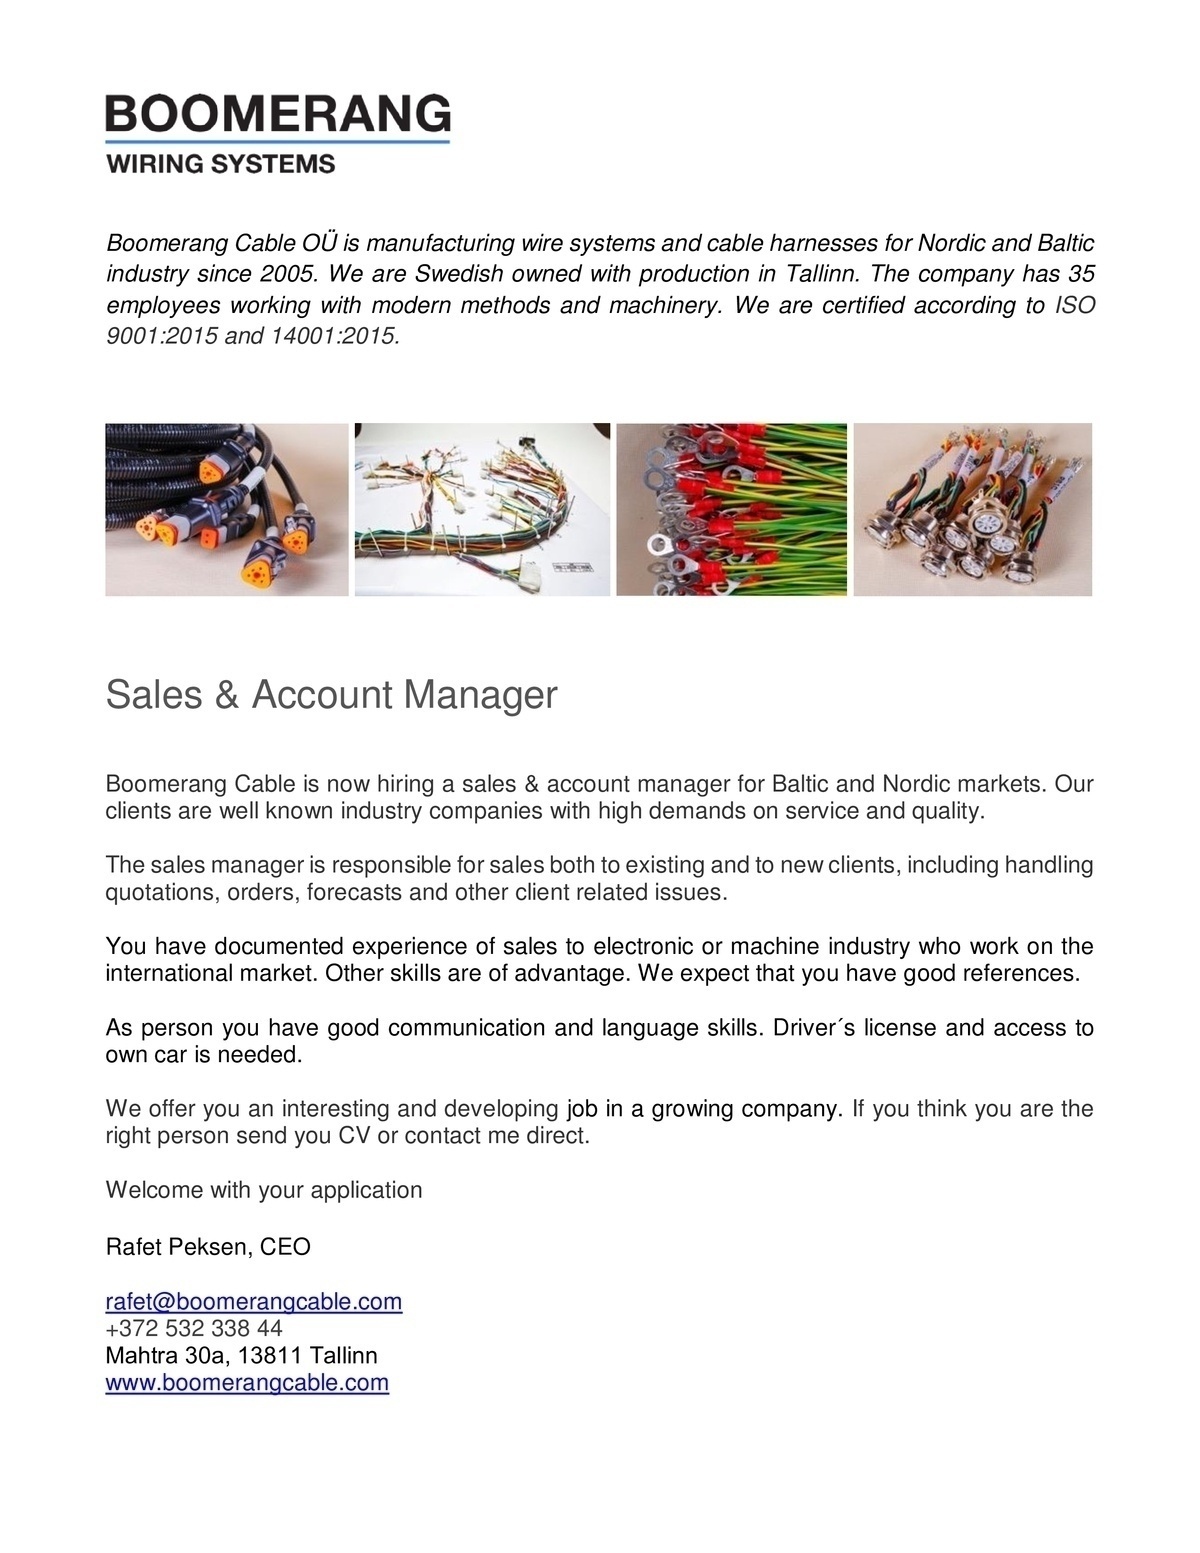 BOOMERANG CABLE OÜ Sales & Account Manager